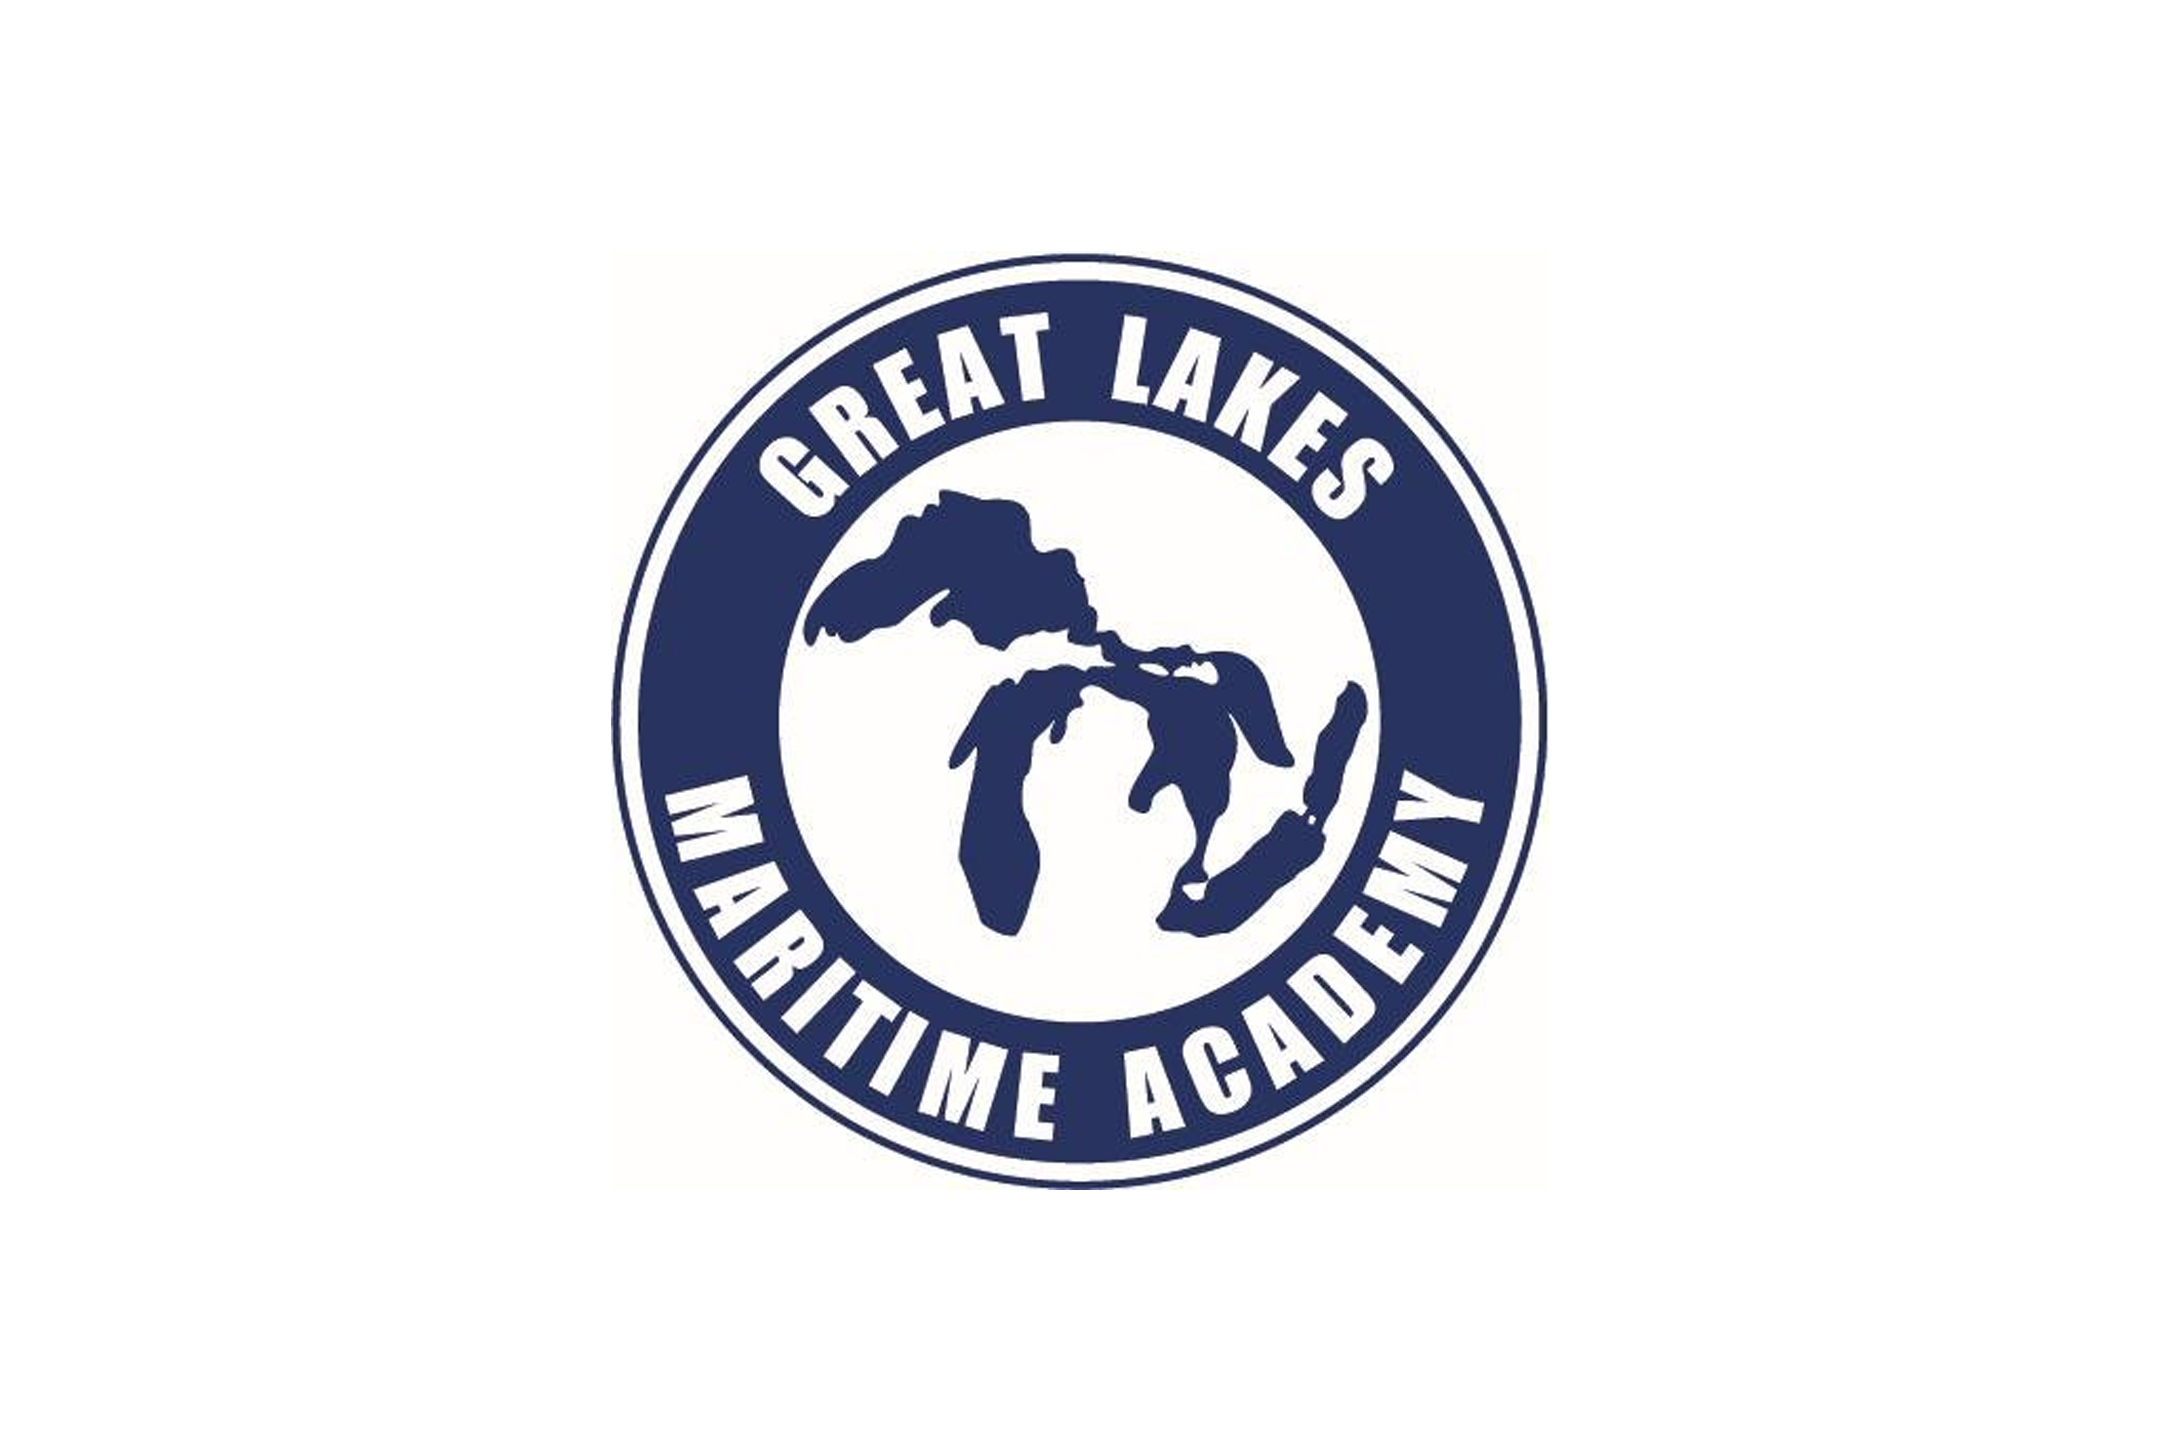 Lake Carriers' Association - LCA - Great Lakes Maritime Academy